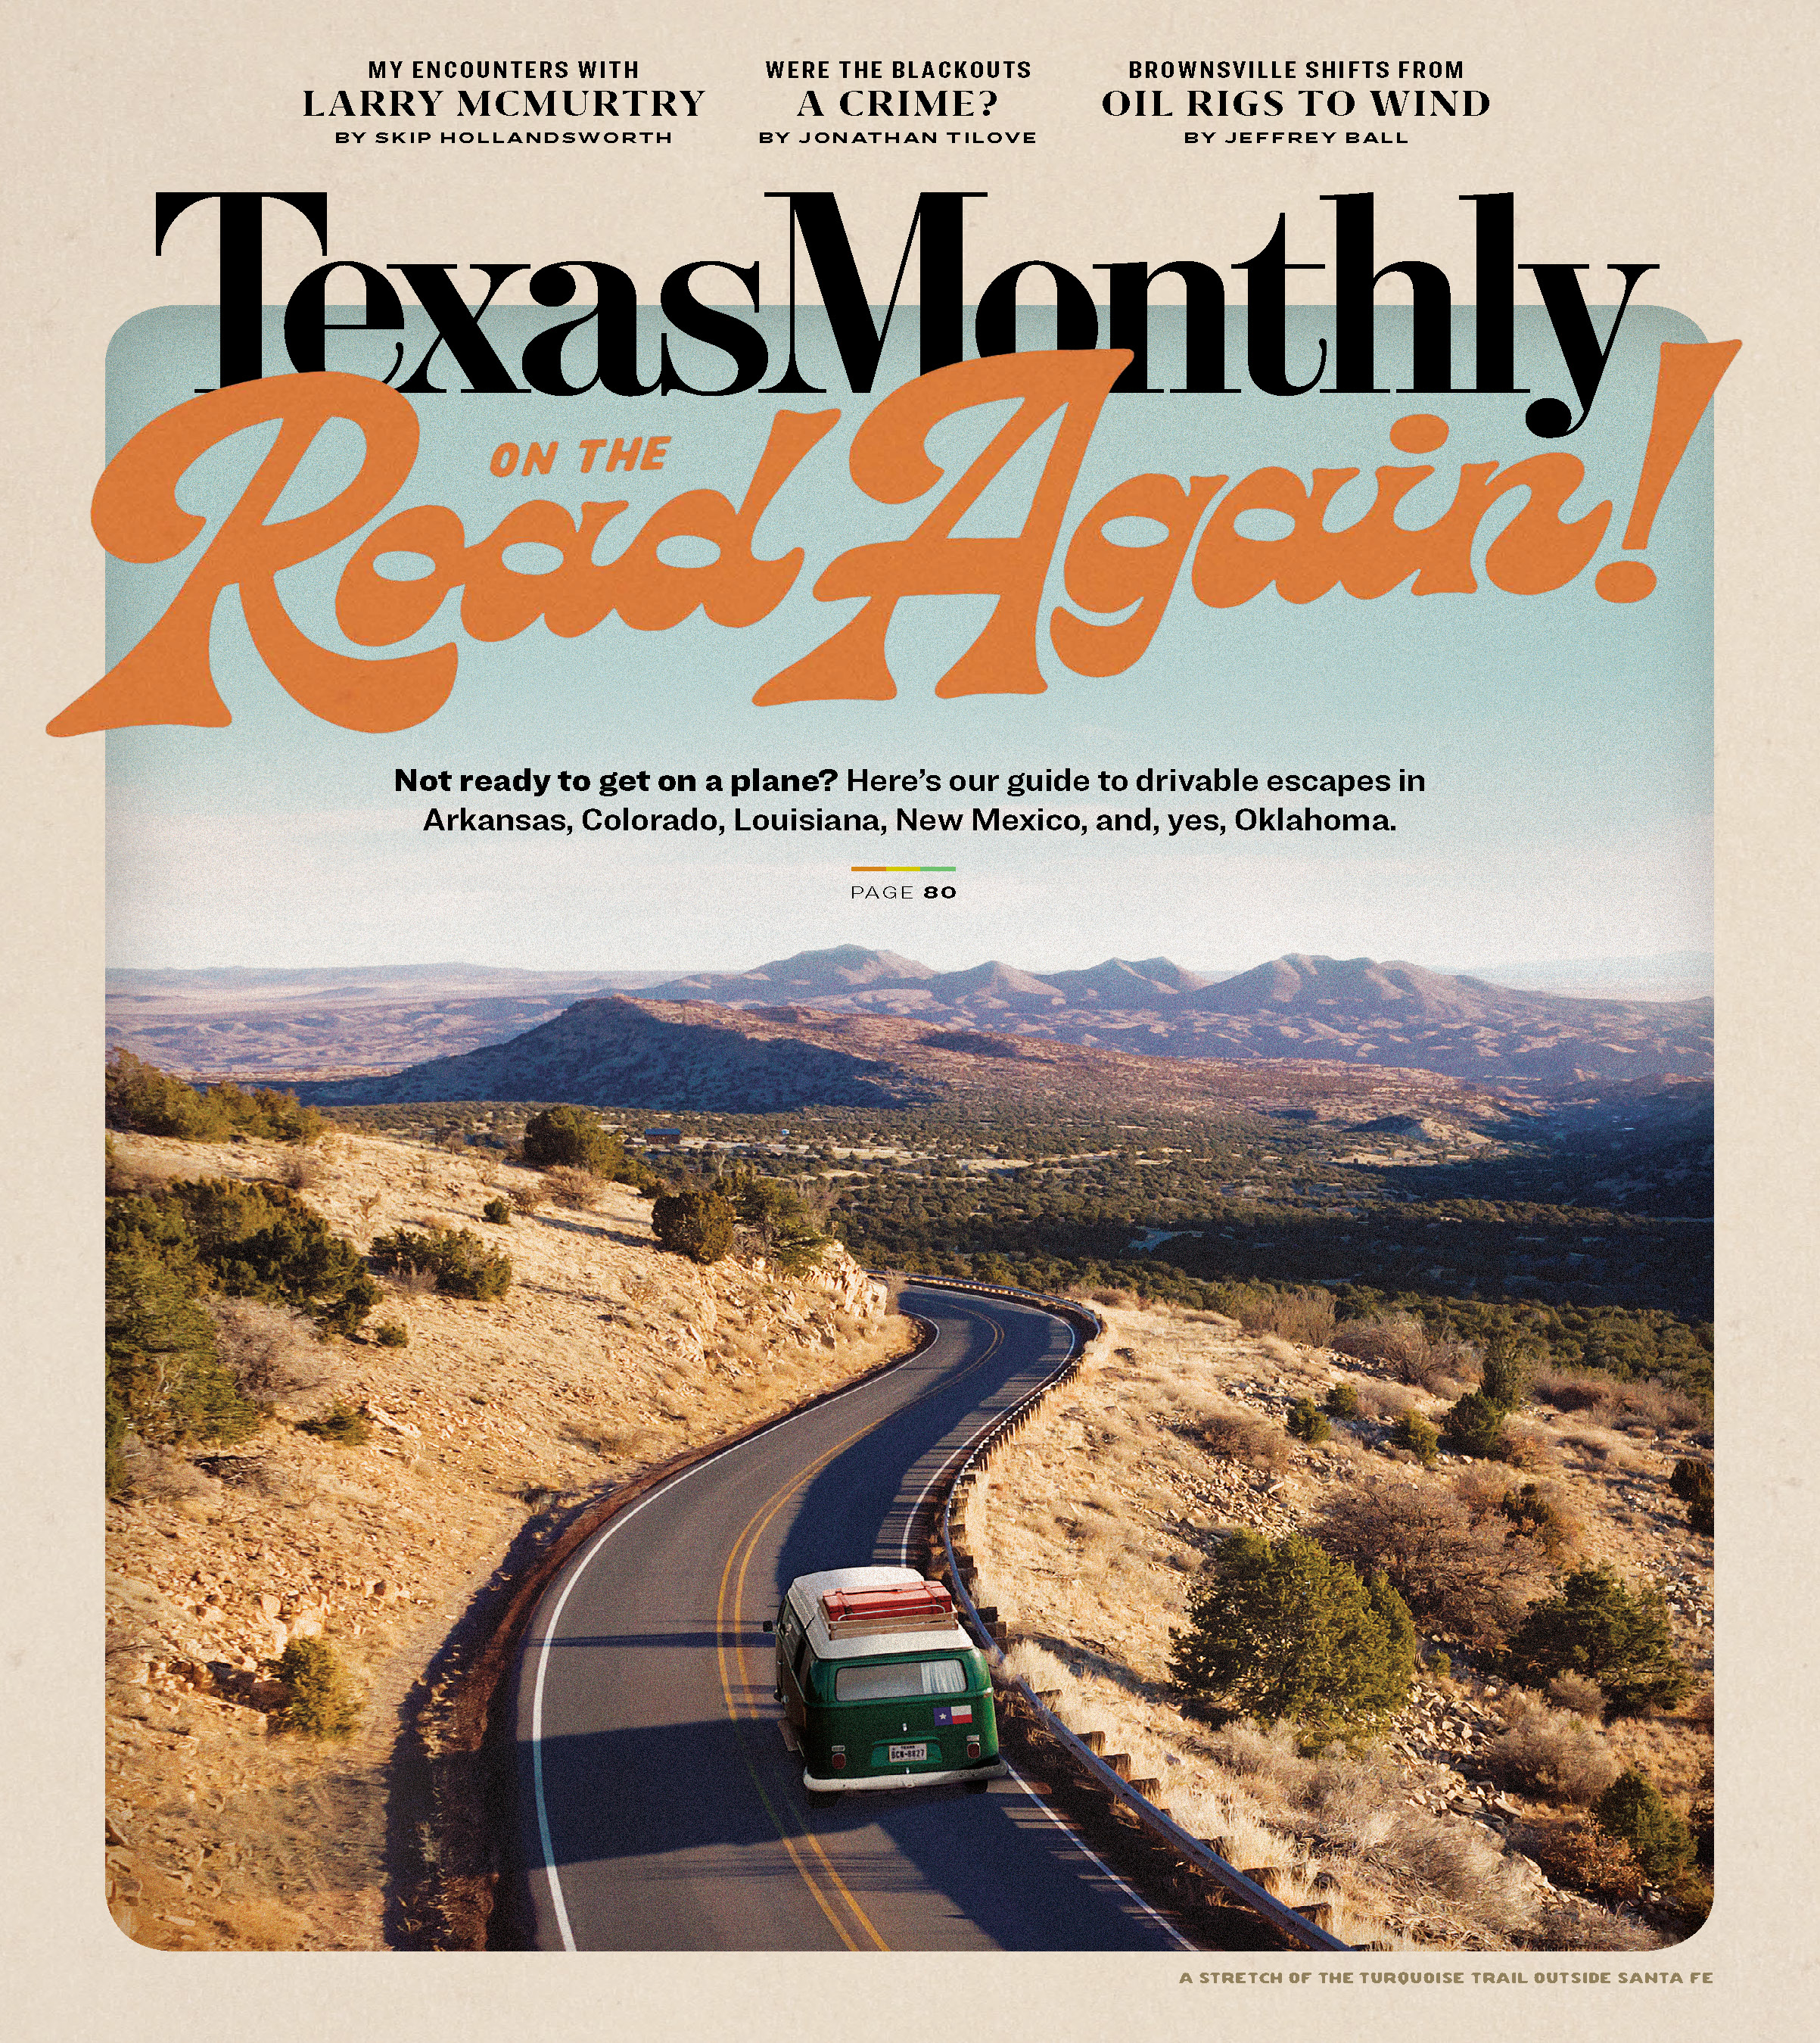 Texas Monthly - "On the Road Again!," May 2021